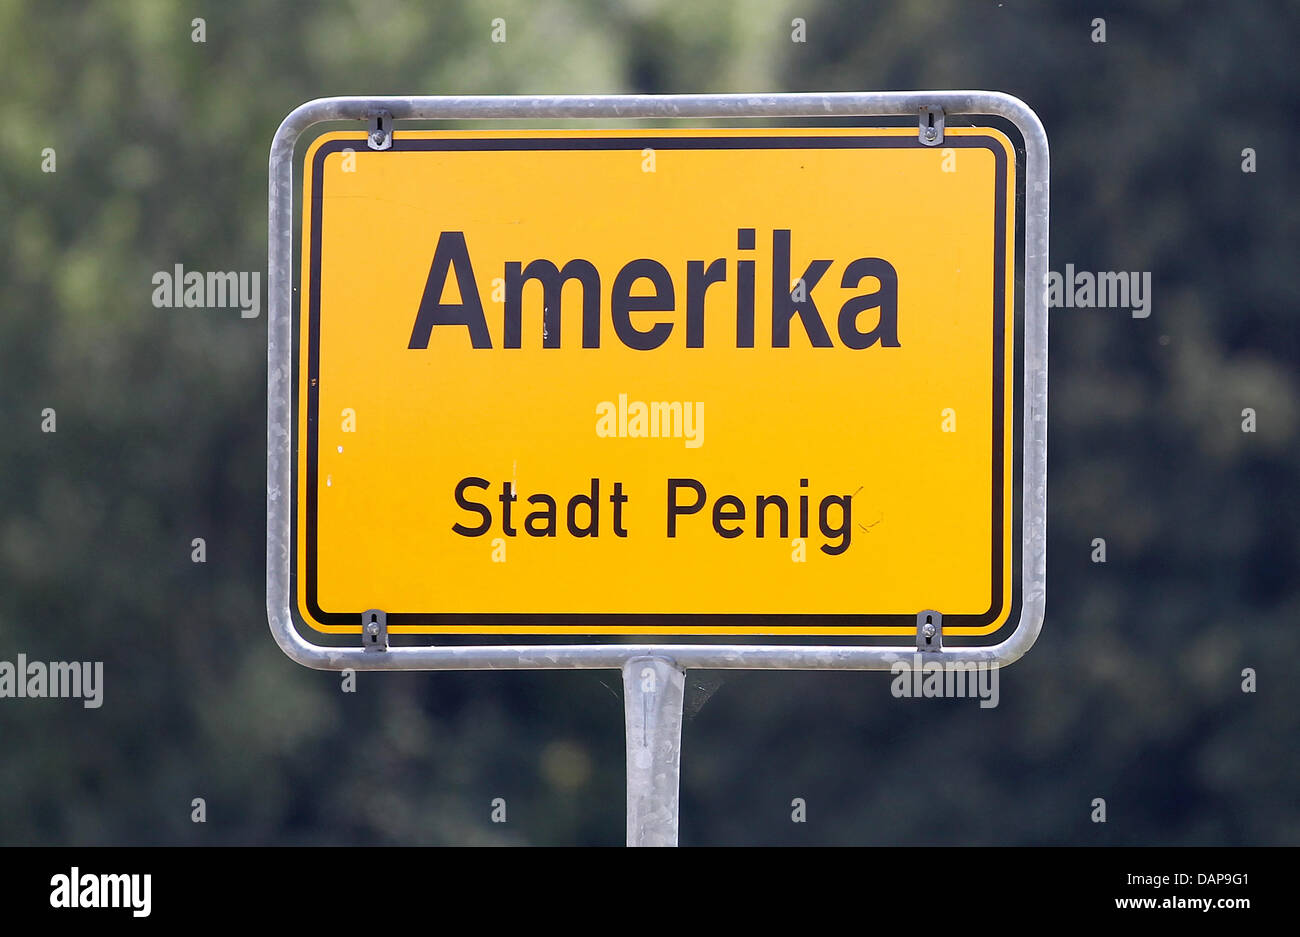 The name place sign of the town 'Amerika' is pictured on 02 August 2011 in Germany. The small town belongs to the city Penig in Germany. Accordning to a legend, the town was named Amerika, because formerly one could only reach it when crossing the Mulde river. So one had to go 'across the pond' to get to Amerika. Photo: Jan Woitas Stock Photo